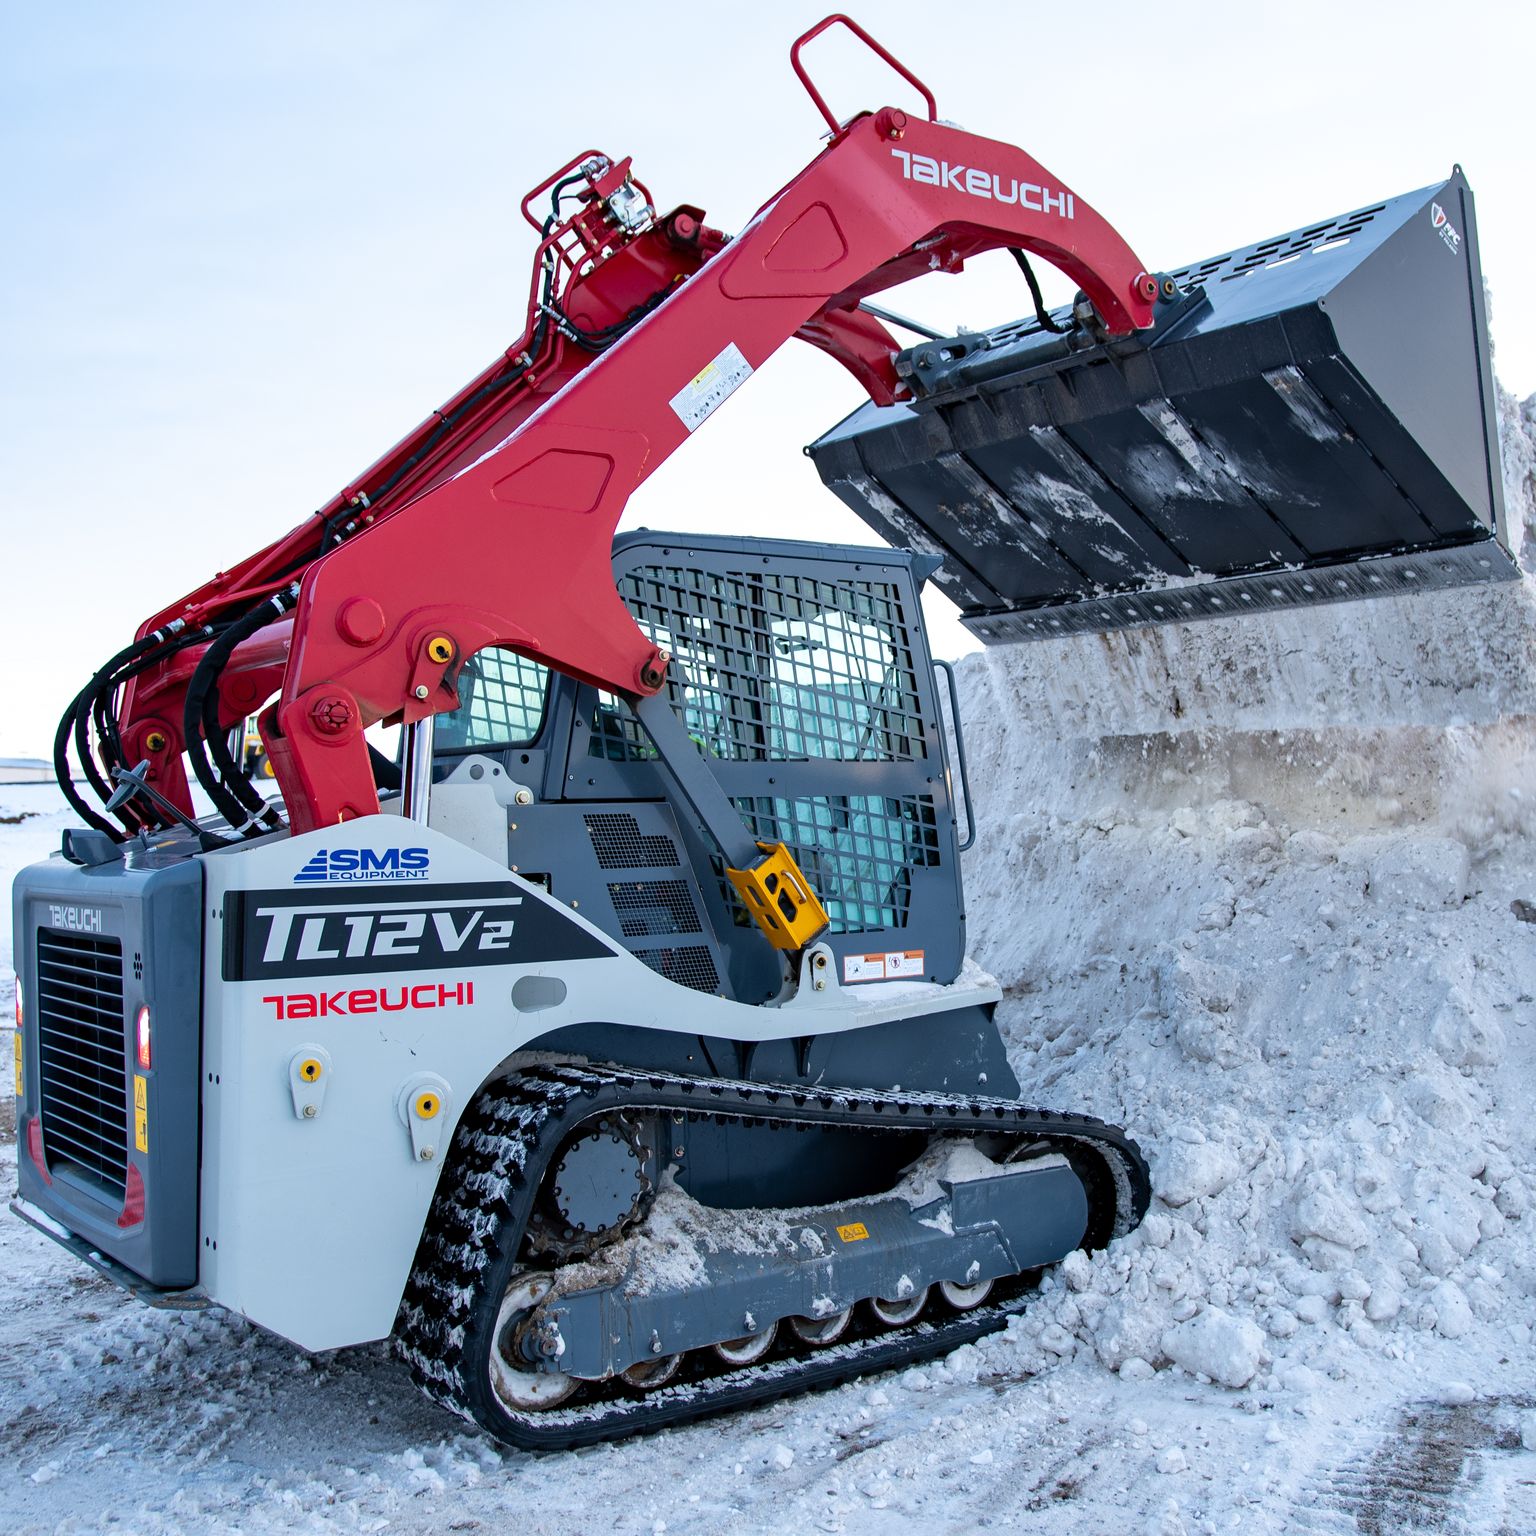 Takeuchi compact track loaders provide outstanding options for winter applications